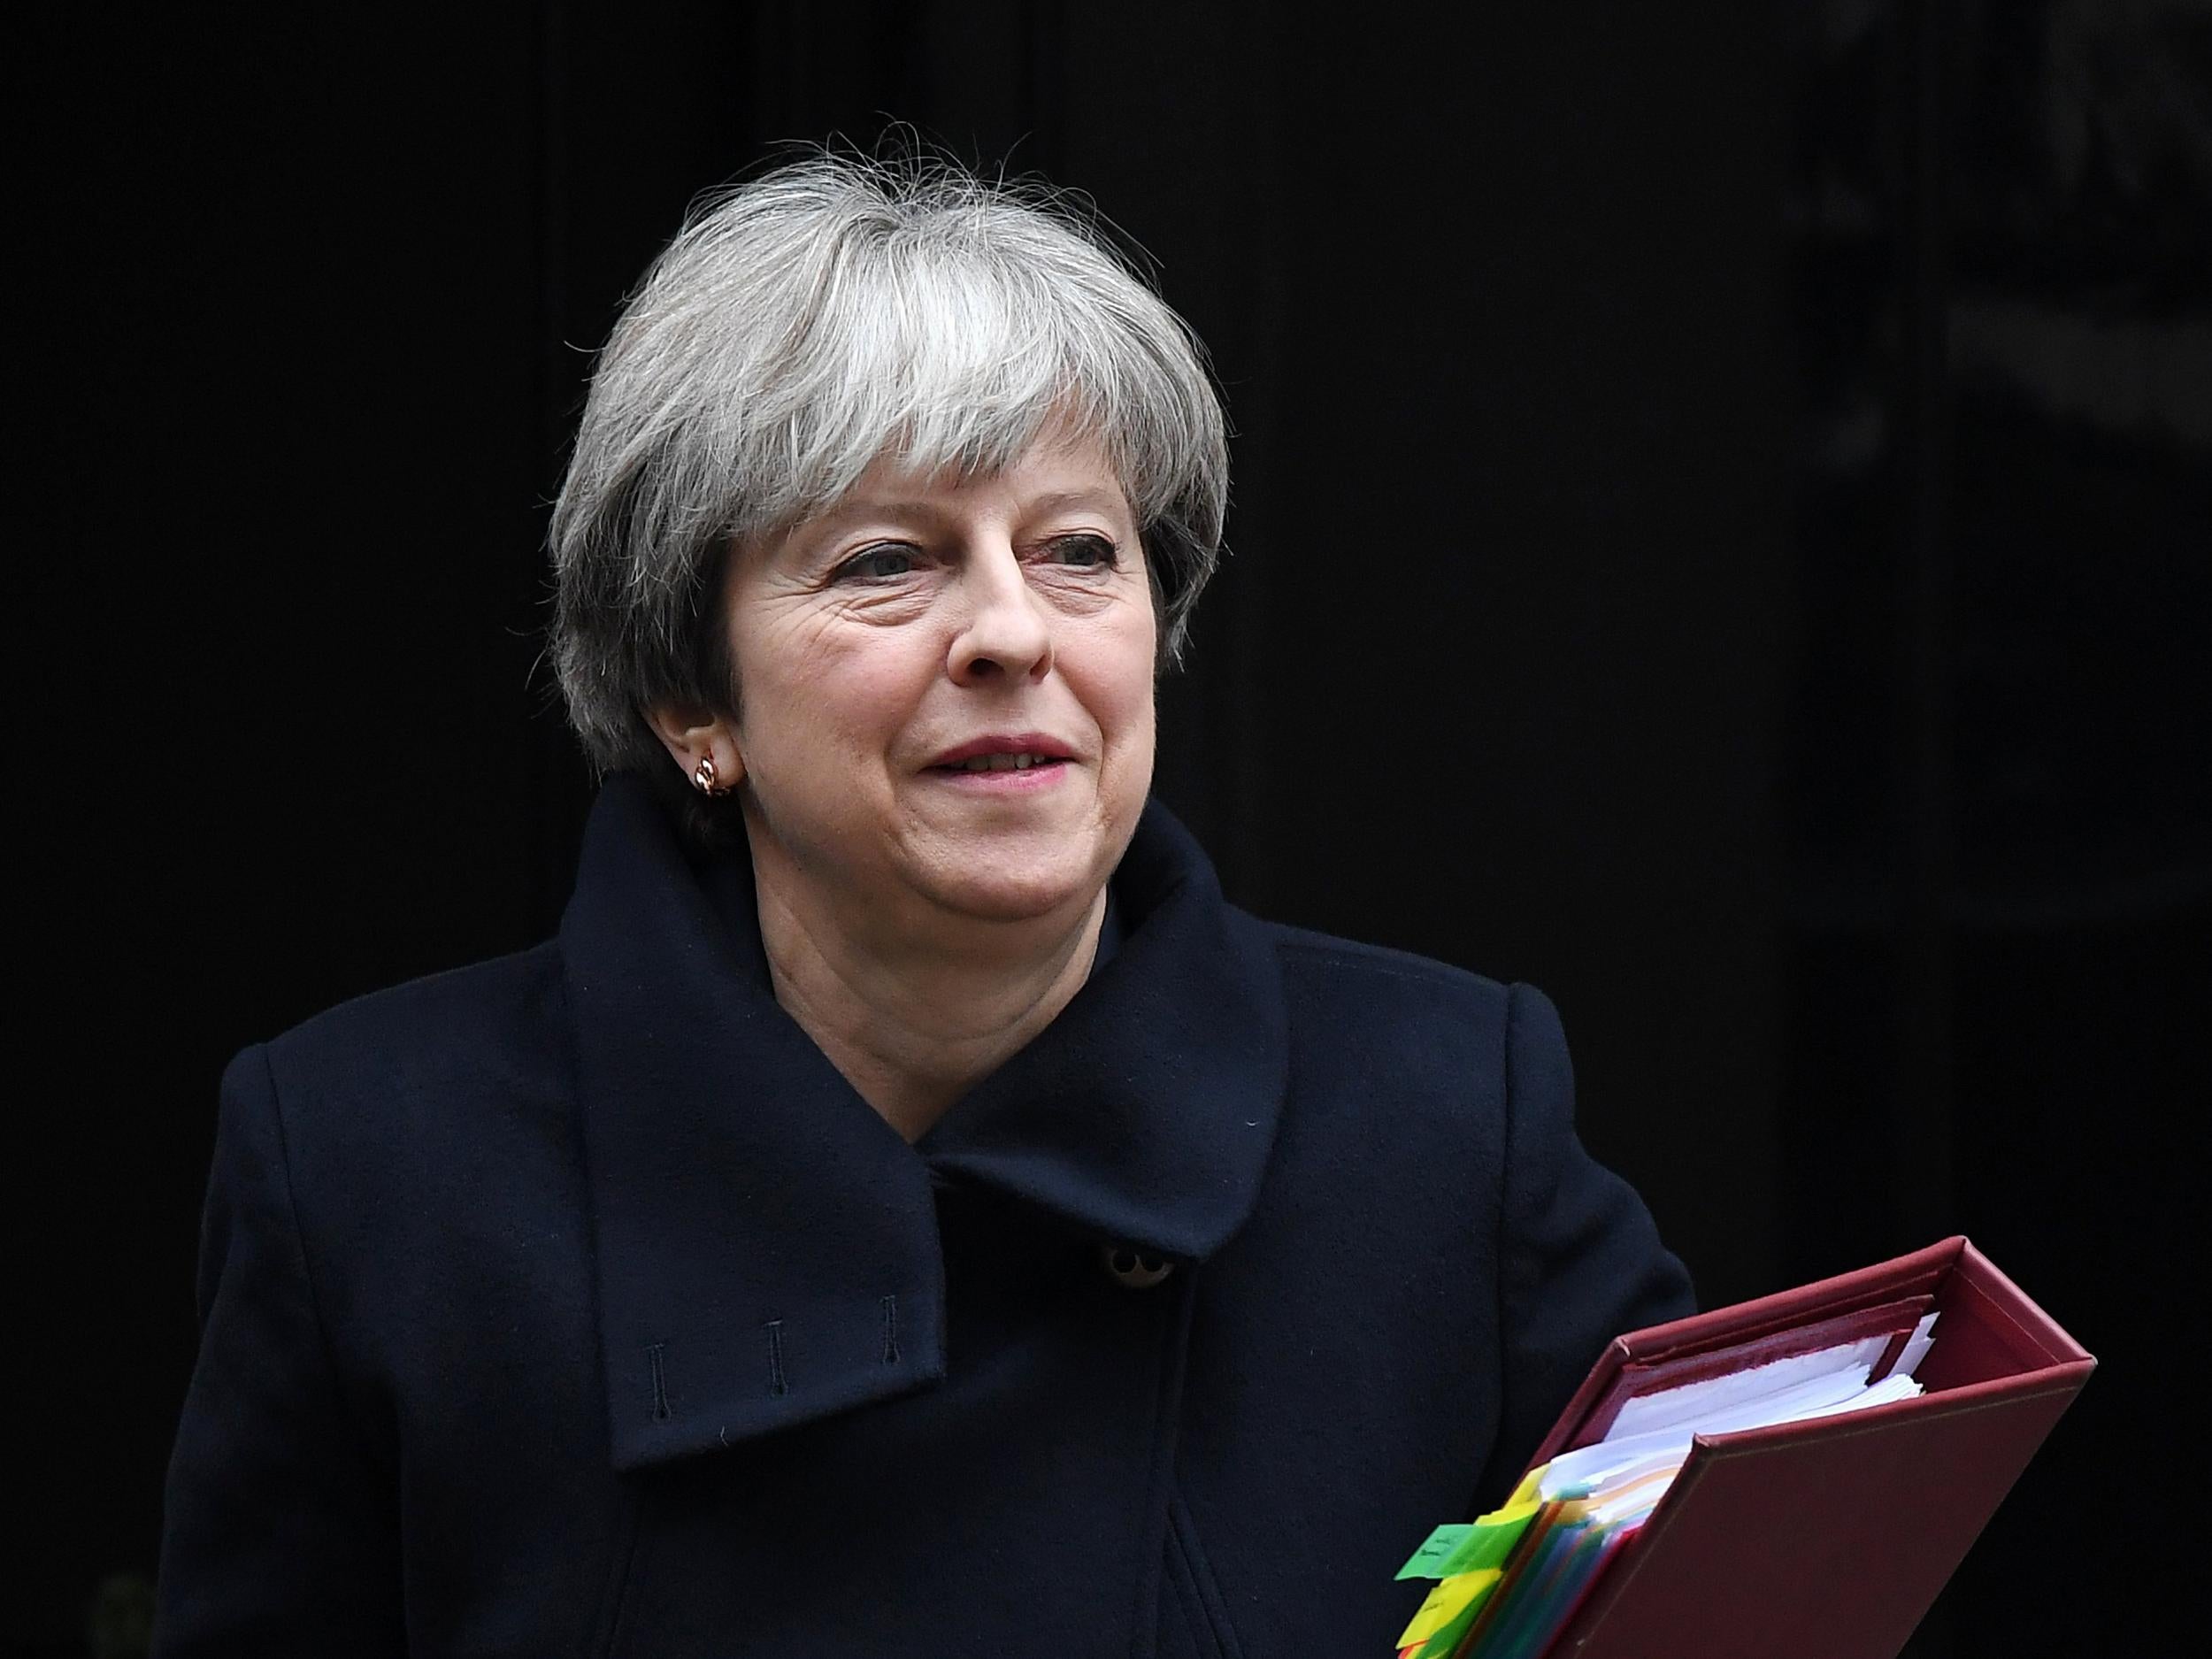 The Prime Minister is racing against time to find a solution to a row over maintaining a soft Irish border that satisfies the EU